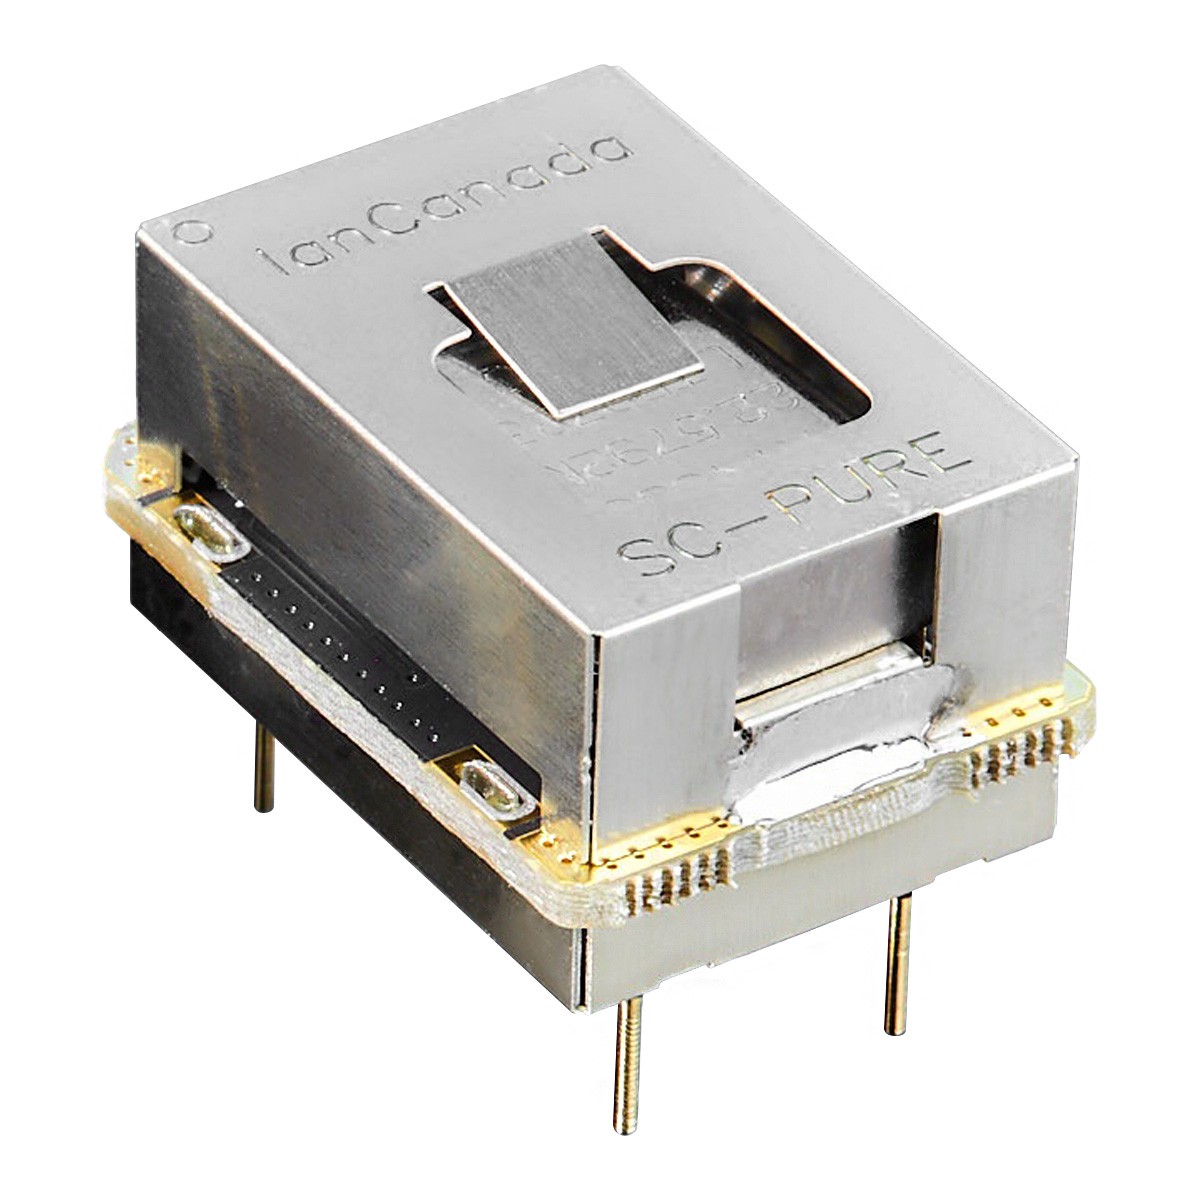 IAN CANADA SC-PURE Femtosecond Clock Ultra-Low Phase Noise 22.5792MHz